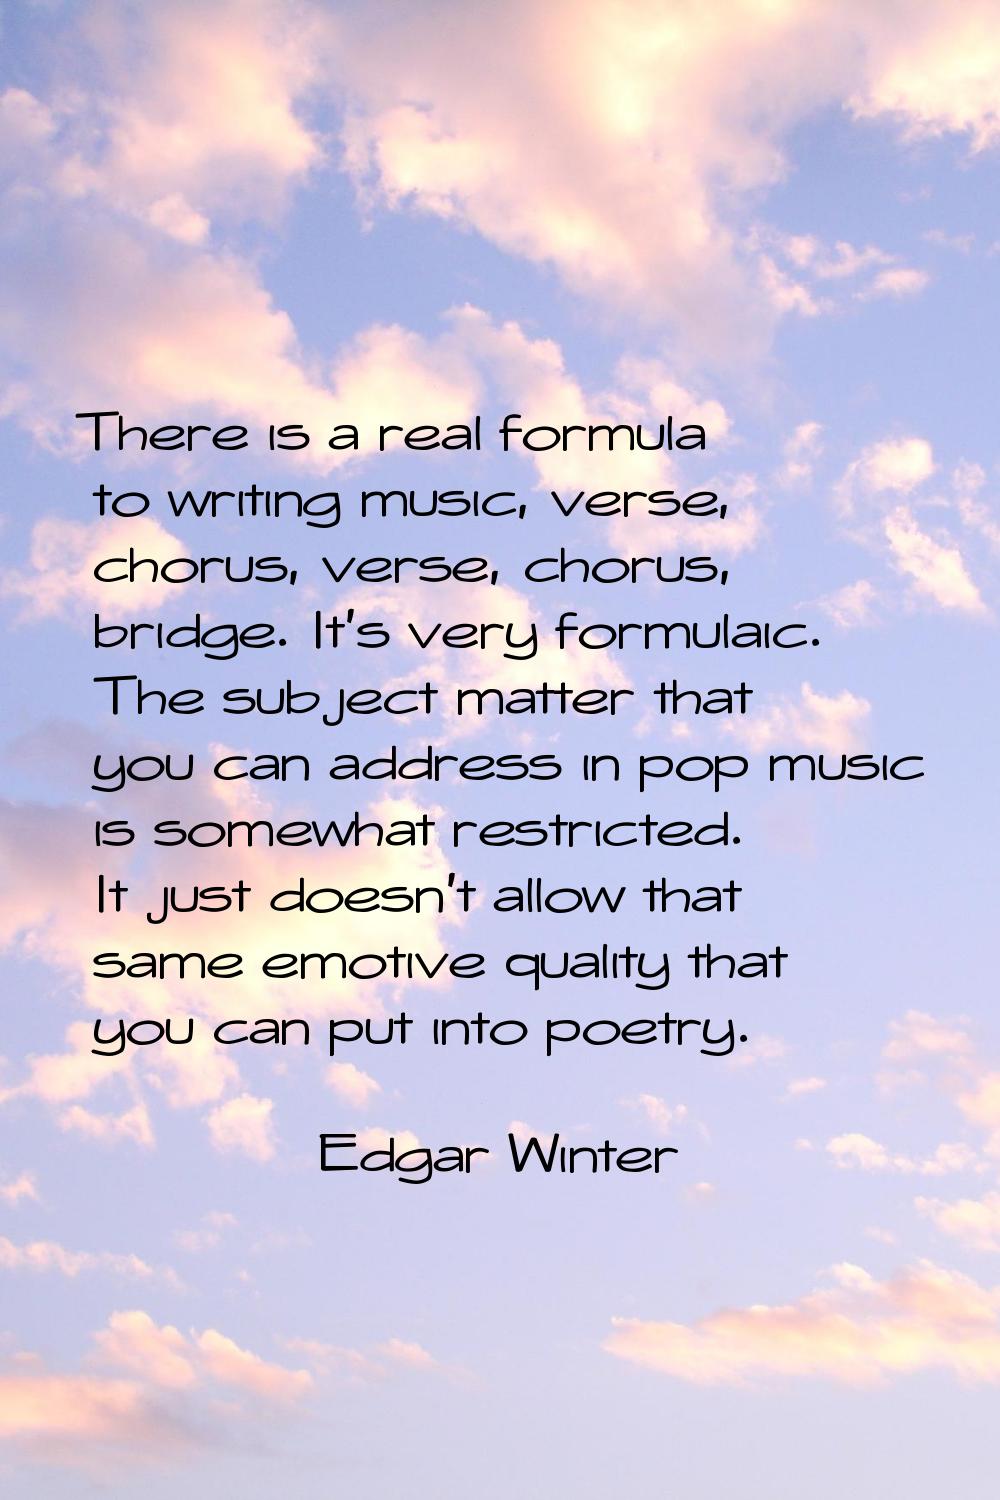 There is a real formula to writing music, verse, chorus, verse, chorus, bridge. It's very formulaic